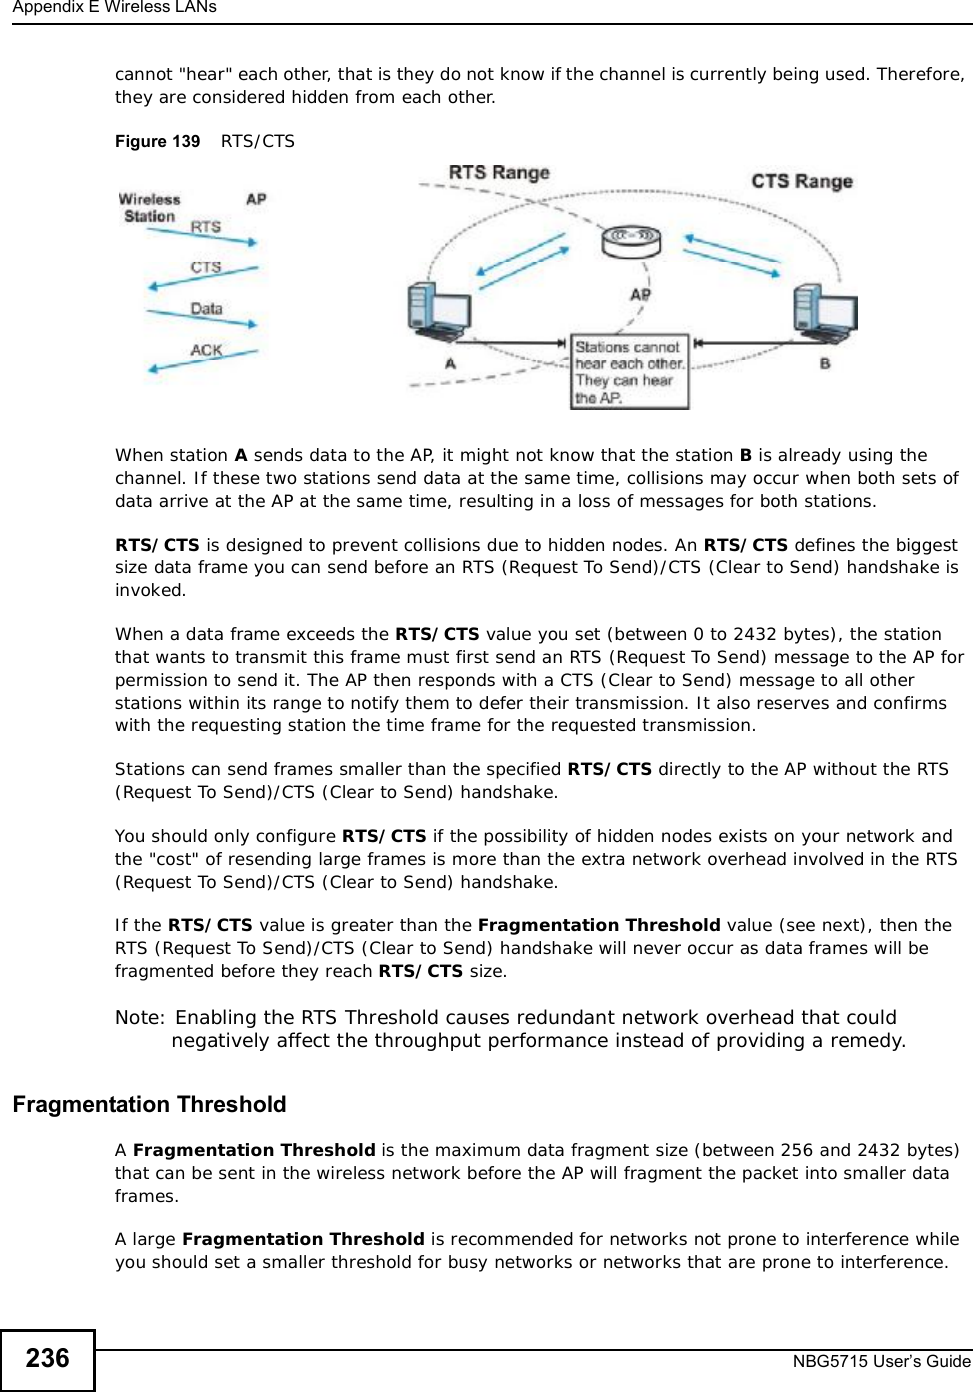 Appendix EWireless LANsNBG5715 User’s Guide236cannot &quot;hear&quot; each other, that is they do not know if the channel is currently being used. Therefore, they are considered hidden from each other. Figure 139    RTS/CTSWhen station A sends data to the AP, it might not know that the station B is already using the channel. If these two stations send data at the same time, collisions may occur when both sets of data arrive at the AP at the same time, resulting in a loss of messages for both stations.RTS/CTS is designed to prevent collisions due to hidden nodes. An RTS/CTS defines the biggest size data frame you can send before an RTS (Request To Send)/CTS (Clear to Send) handshake is invoked.When a data frame exceeds the RTS/CTS value you set (between 0 to 2432 bytes), the station that wants to transmit this frame must first send an RTS (Request To Send) message to the AP for permission to send it. The AP then responds with a CTS (Clear to Send) message to all other stations within its range to notify them to defer their transmission. It also reserves and confirms with the requesting station the time frame for the requested transmission.Stations can send frames smaller than the specified RTS/CTS directly to the AP without the RTS (Request To Send)/CTS (Clear to Send) handshake. You should only configure RTS/CTS if the possibility of hidden nodes exists on your network and the &quot;cost&quot; of resending large frames is more than the extra network overhead involved in the RTS (Request To Send)/CTS (Clear to Send) handshake. If the RTS/CTS value is greater than the Fragmentation Threshold value (see next), then the RTS (Request To Send)/CTS (Clear to Send) handshake will never occur as data frames will be fragmented before they reach RTS/CTS size. Note: Enabling the RTS Threshold causes redundant network overhead that could negatively affect the throughput performance instead of providing a remedy.Fragmentation ThresholdAFragmentation Threshold is the maximum data fragment size (between 256 and 2432 bytes) that can be sent in the wireless network before the AP will fragment the packet into smaller data frames.A large Fragmentation Threshold is recommended for networks not prone to interference while you should set a smaller threshold for busy networks or networks that are prone to interference.